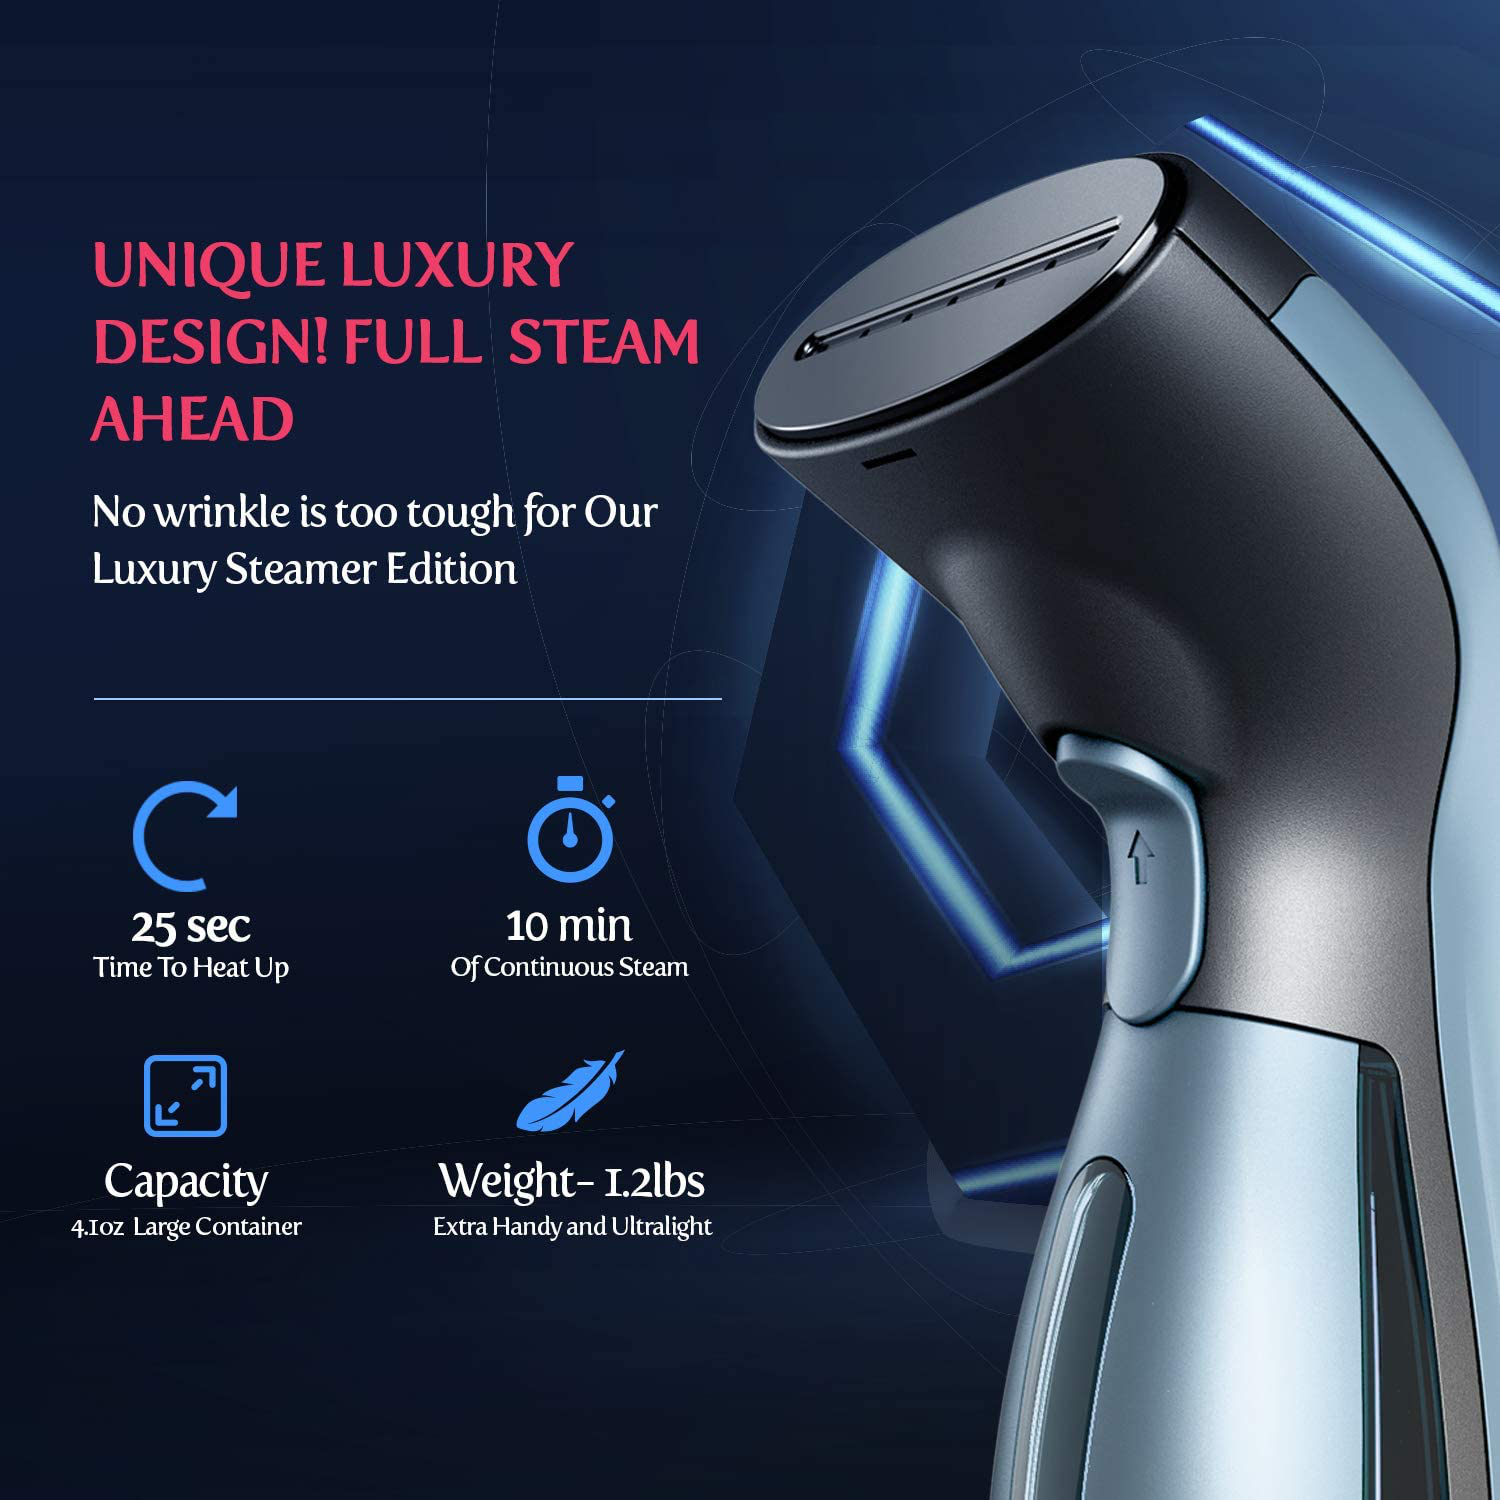 iSteam Steamer for Clothes [New Technology] Powerful Dry Steam. Multi-Task: Fabric Wrinkle Remover- Clean- Refresh. Handheld Clothing Accessory. for All Kind of Garments. Home/Travel (Blue)